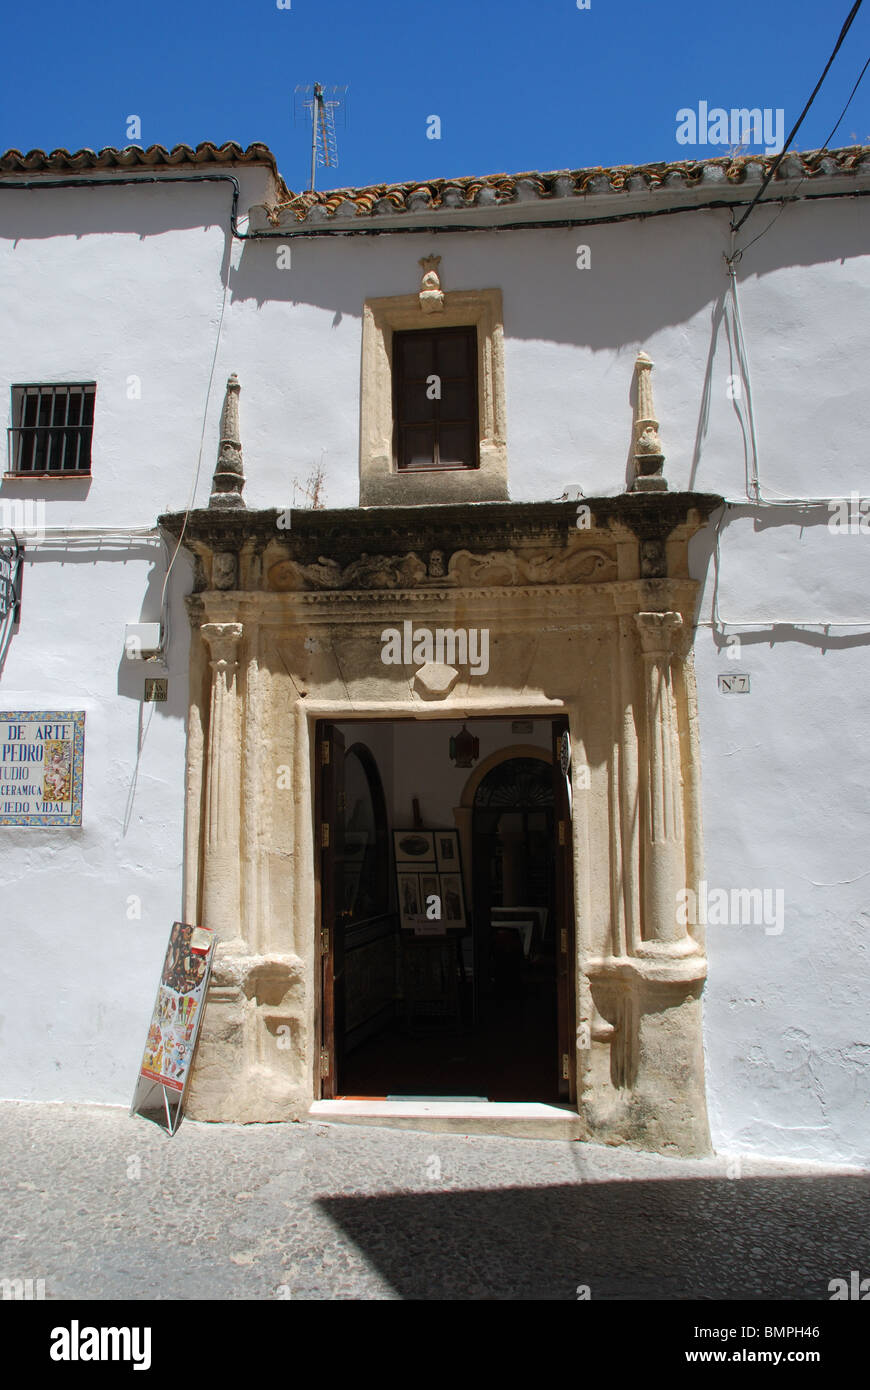 Art gallery in an old mansion house, Arcos de la Frontera, Cadiz Province, Andalucia, Spain, Western Europe. Stock Photo